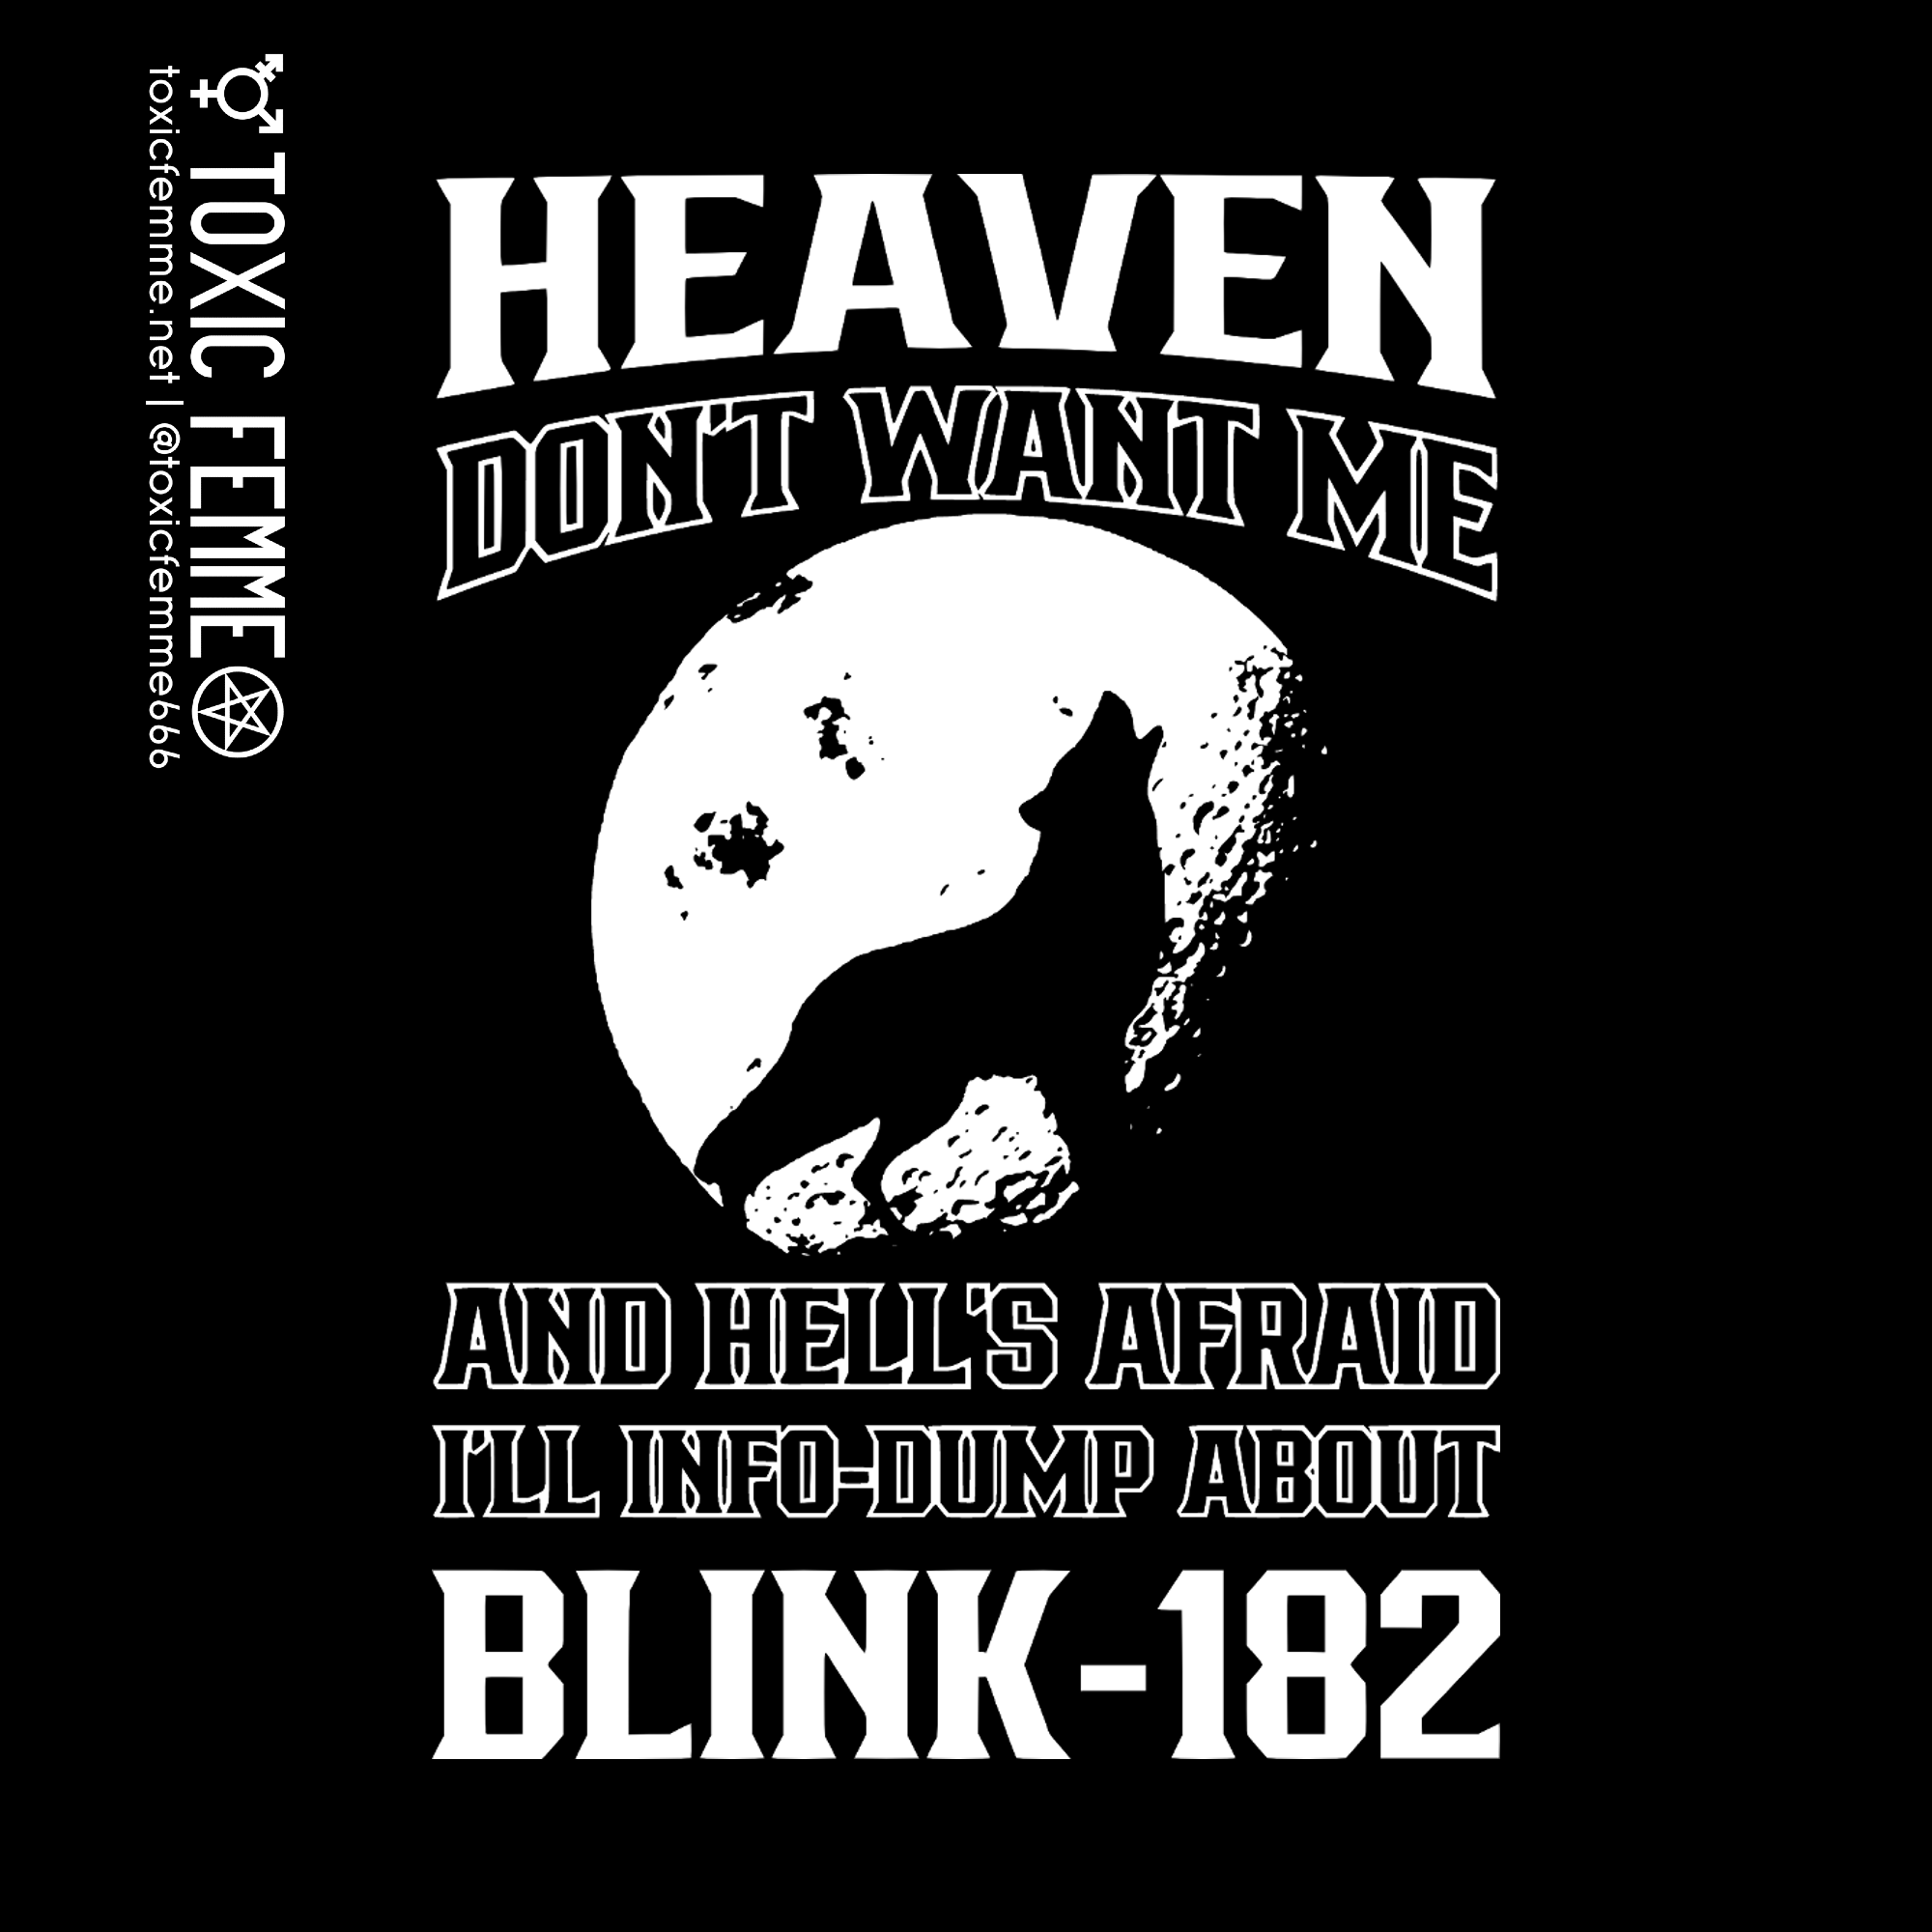 Heaven Don't Want Me (blink-182) tee